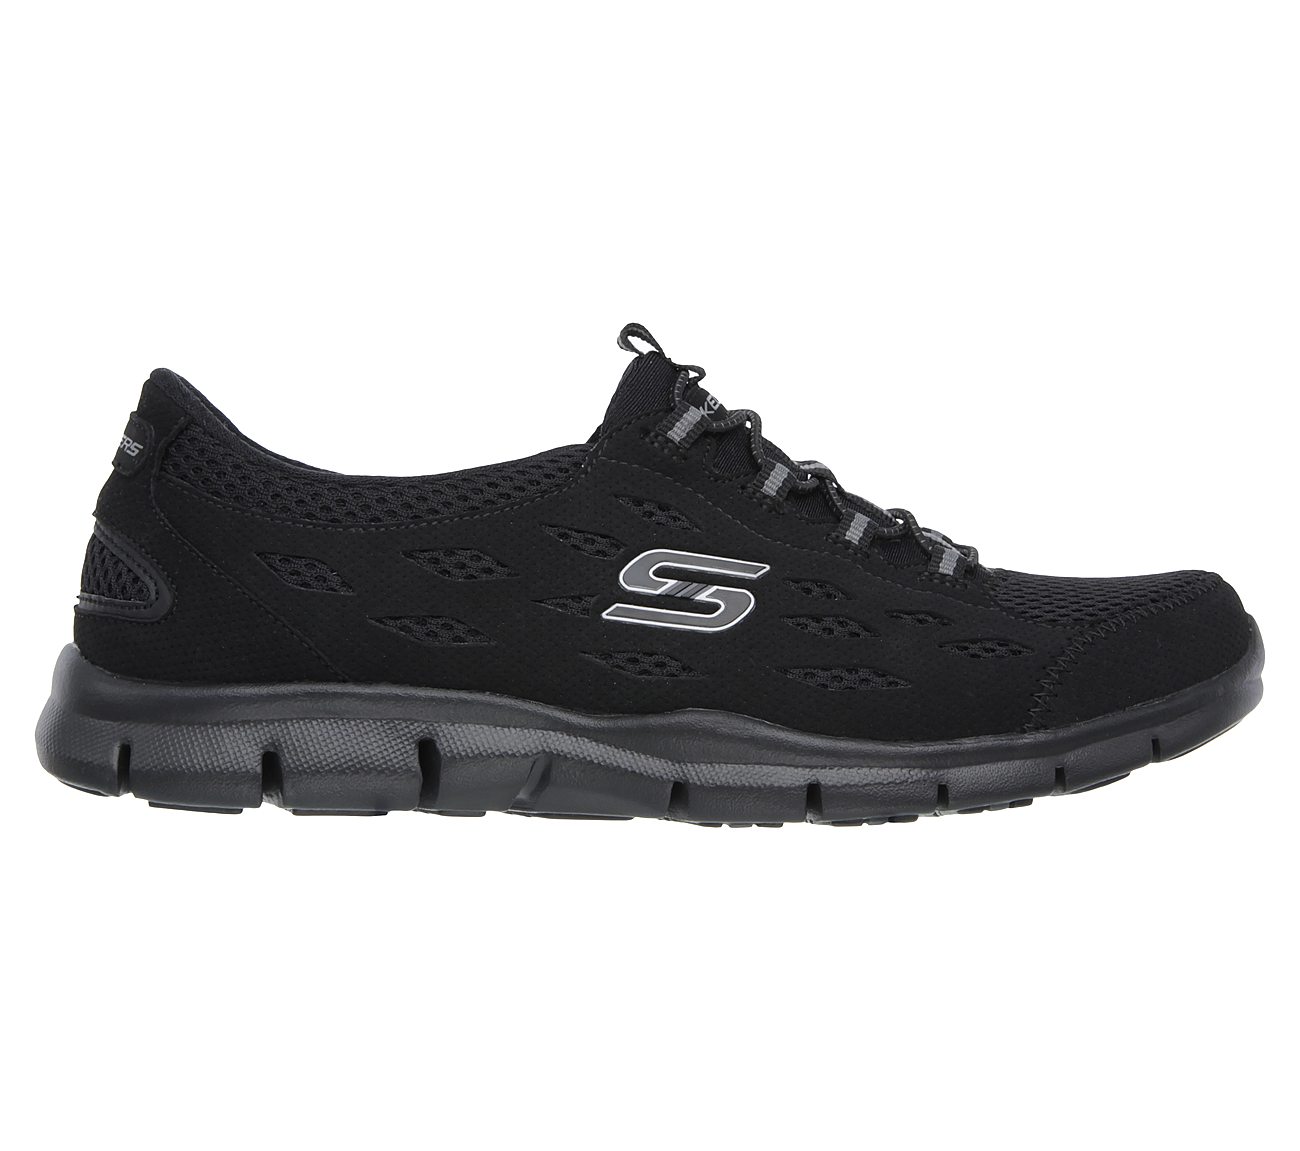 sketchers going places